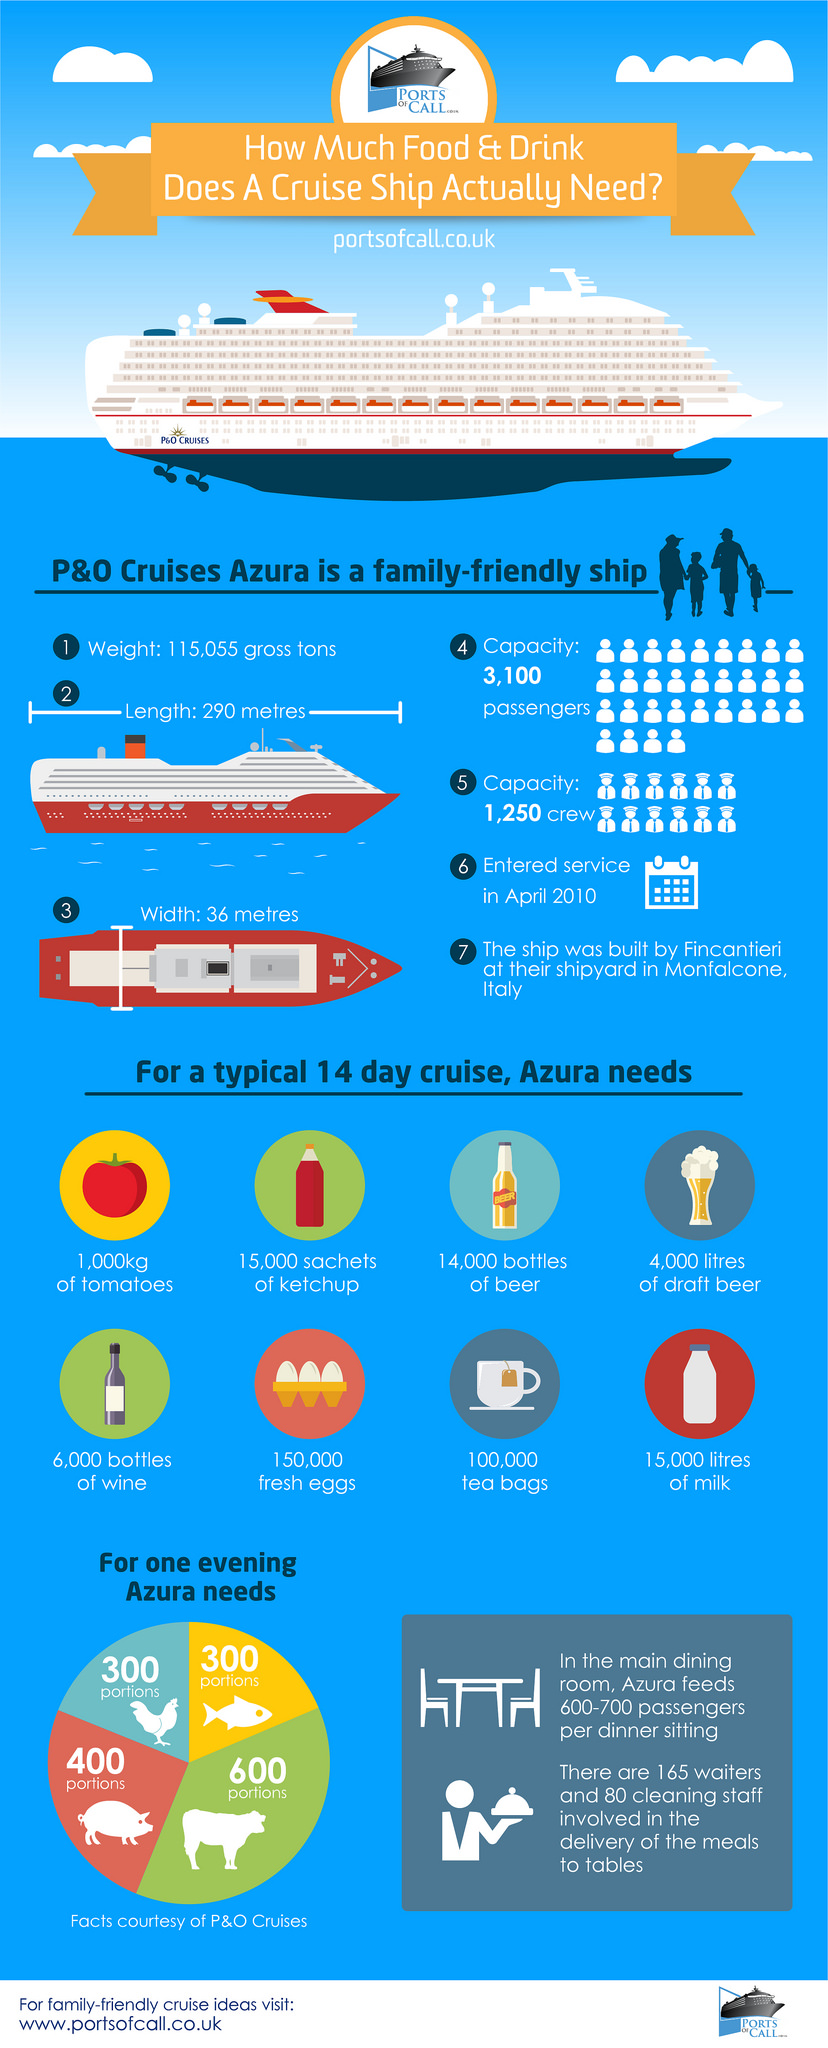 How Much Food And Drink Does A Cruise Ship Actually Need